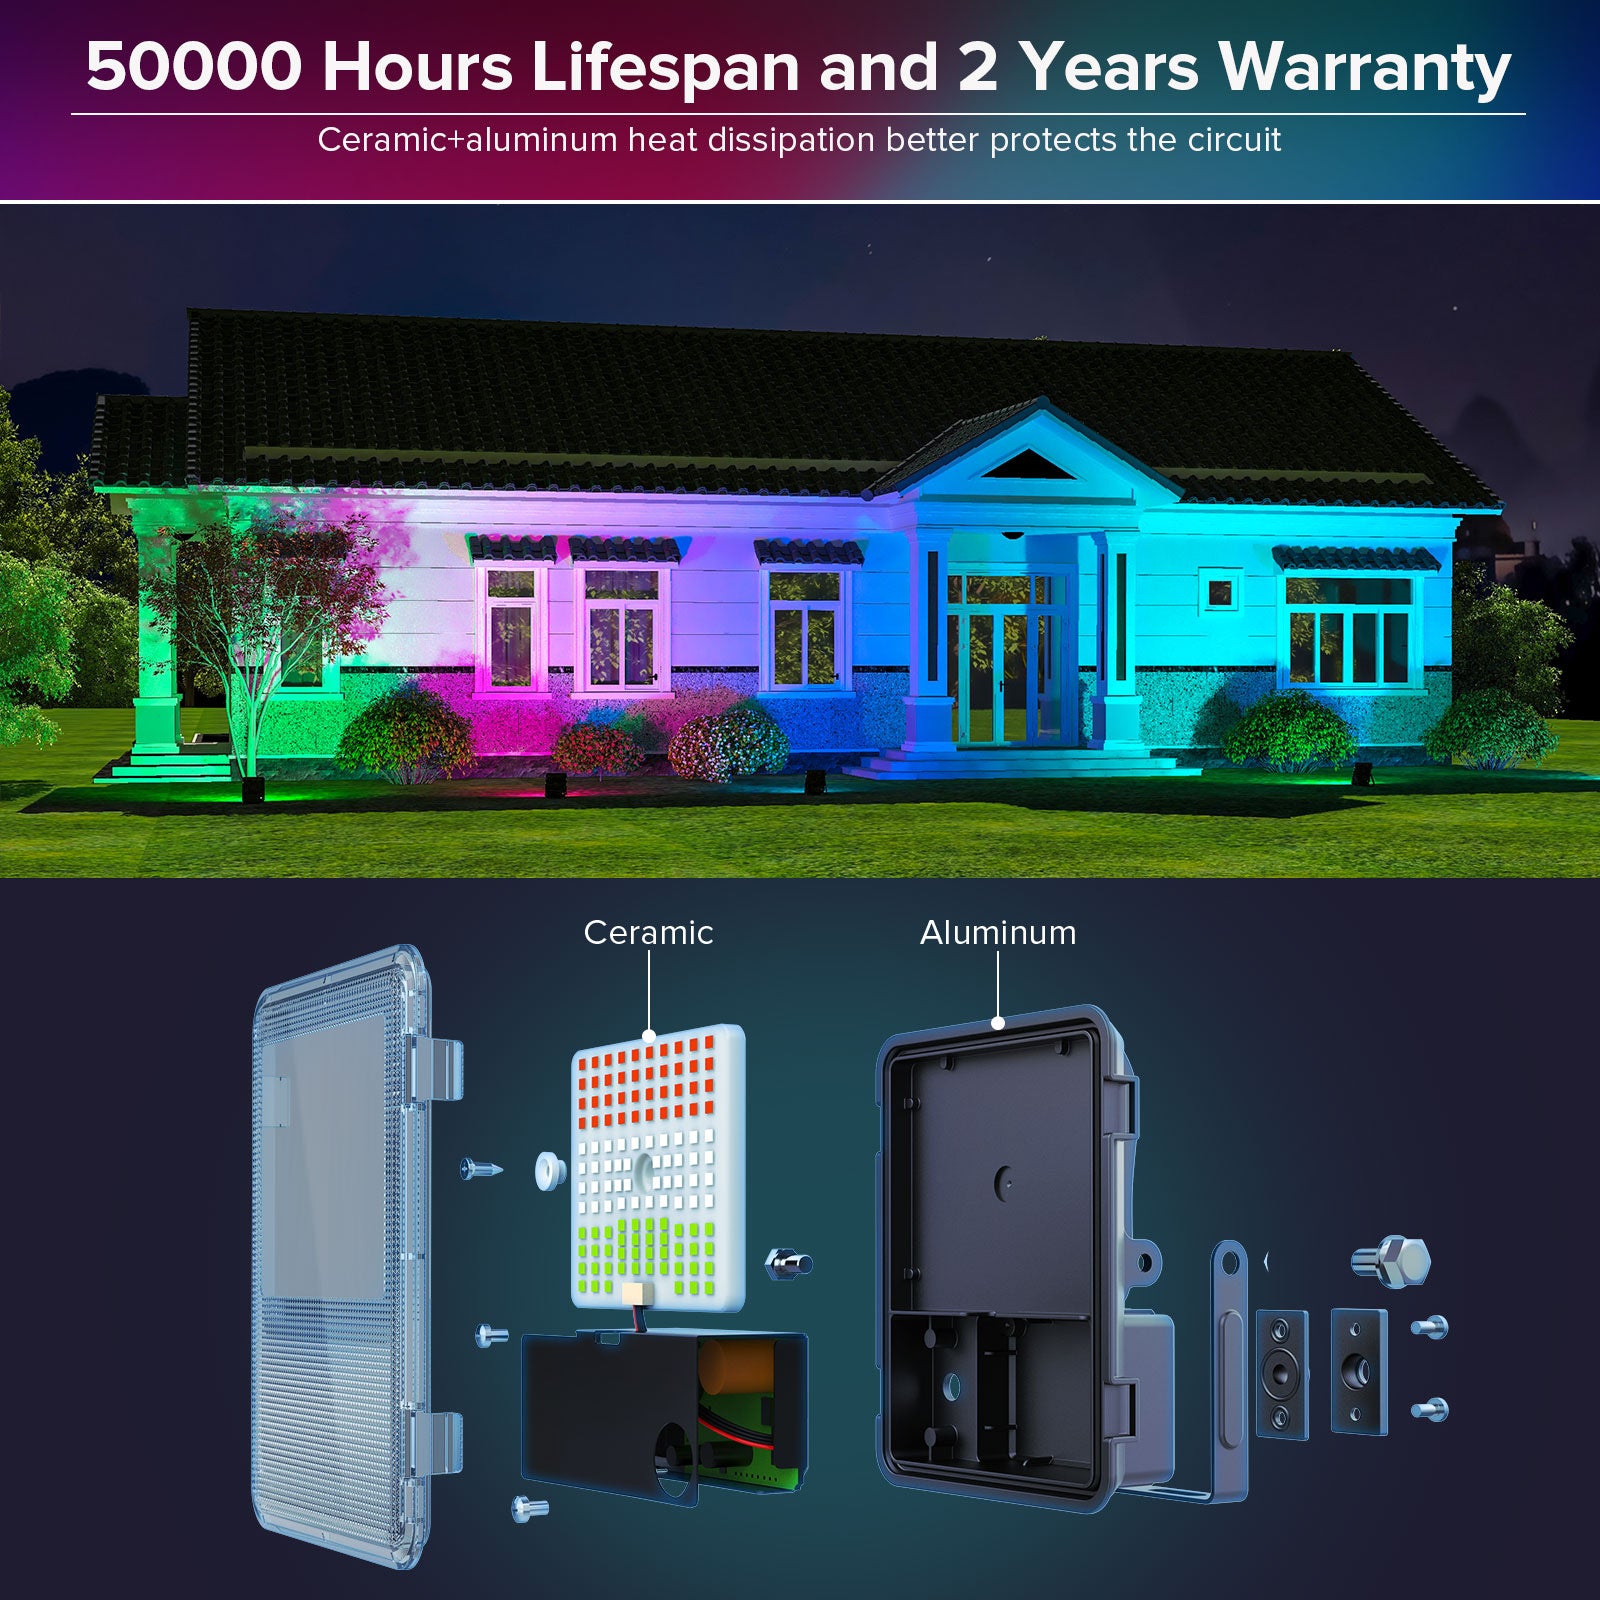 120W RGB Led Flood Light (US ONLY) provides 50000 Hours Lifespan and 2 Years Warranty